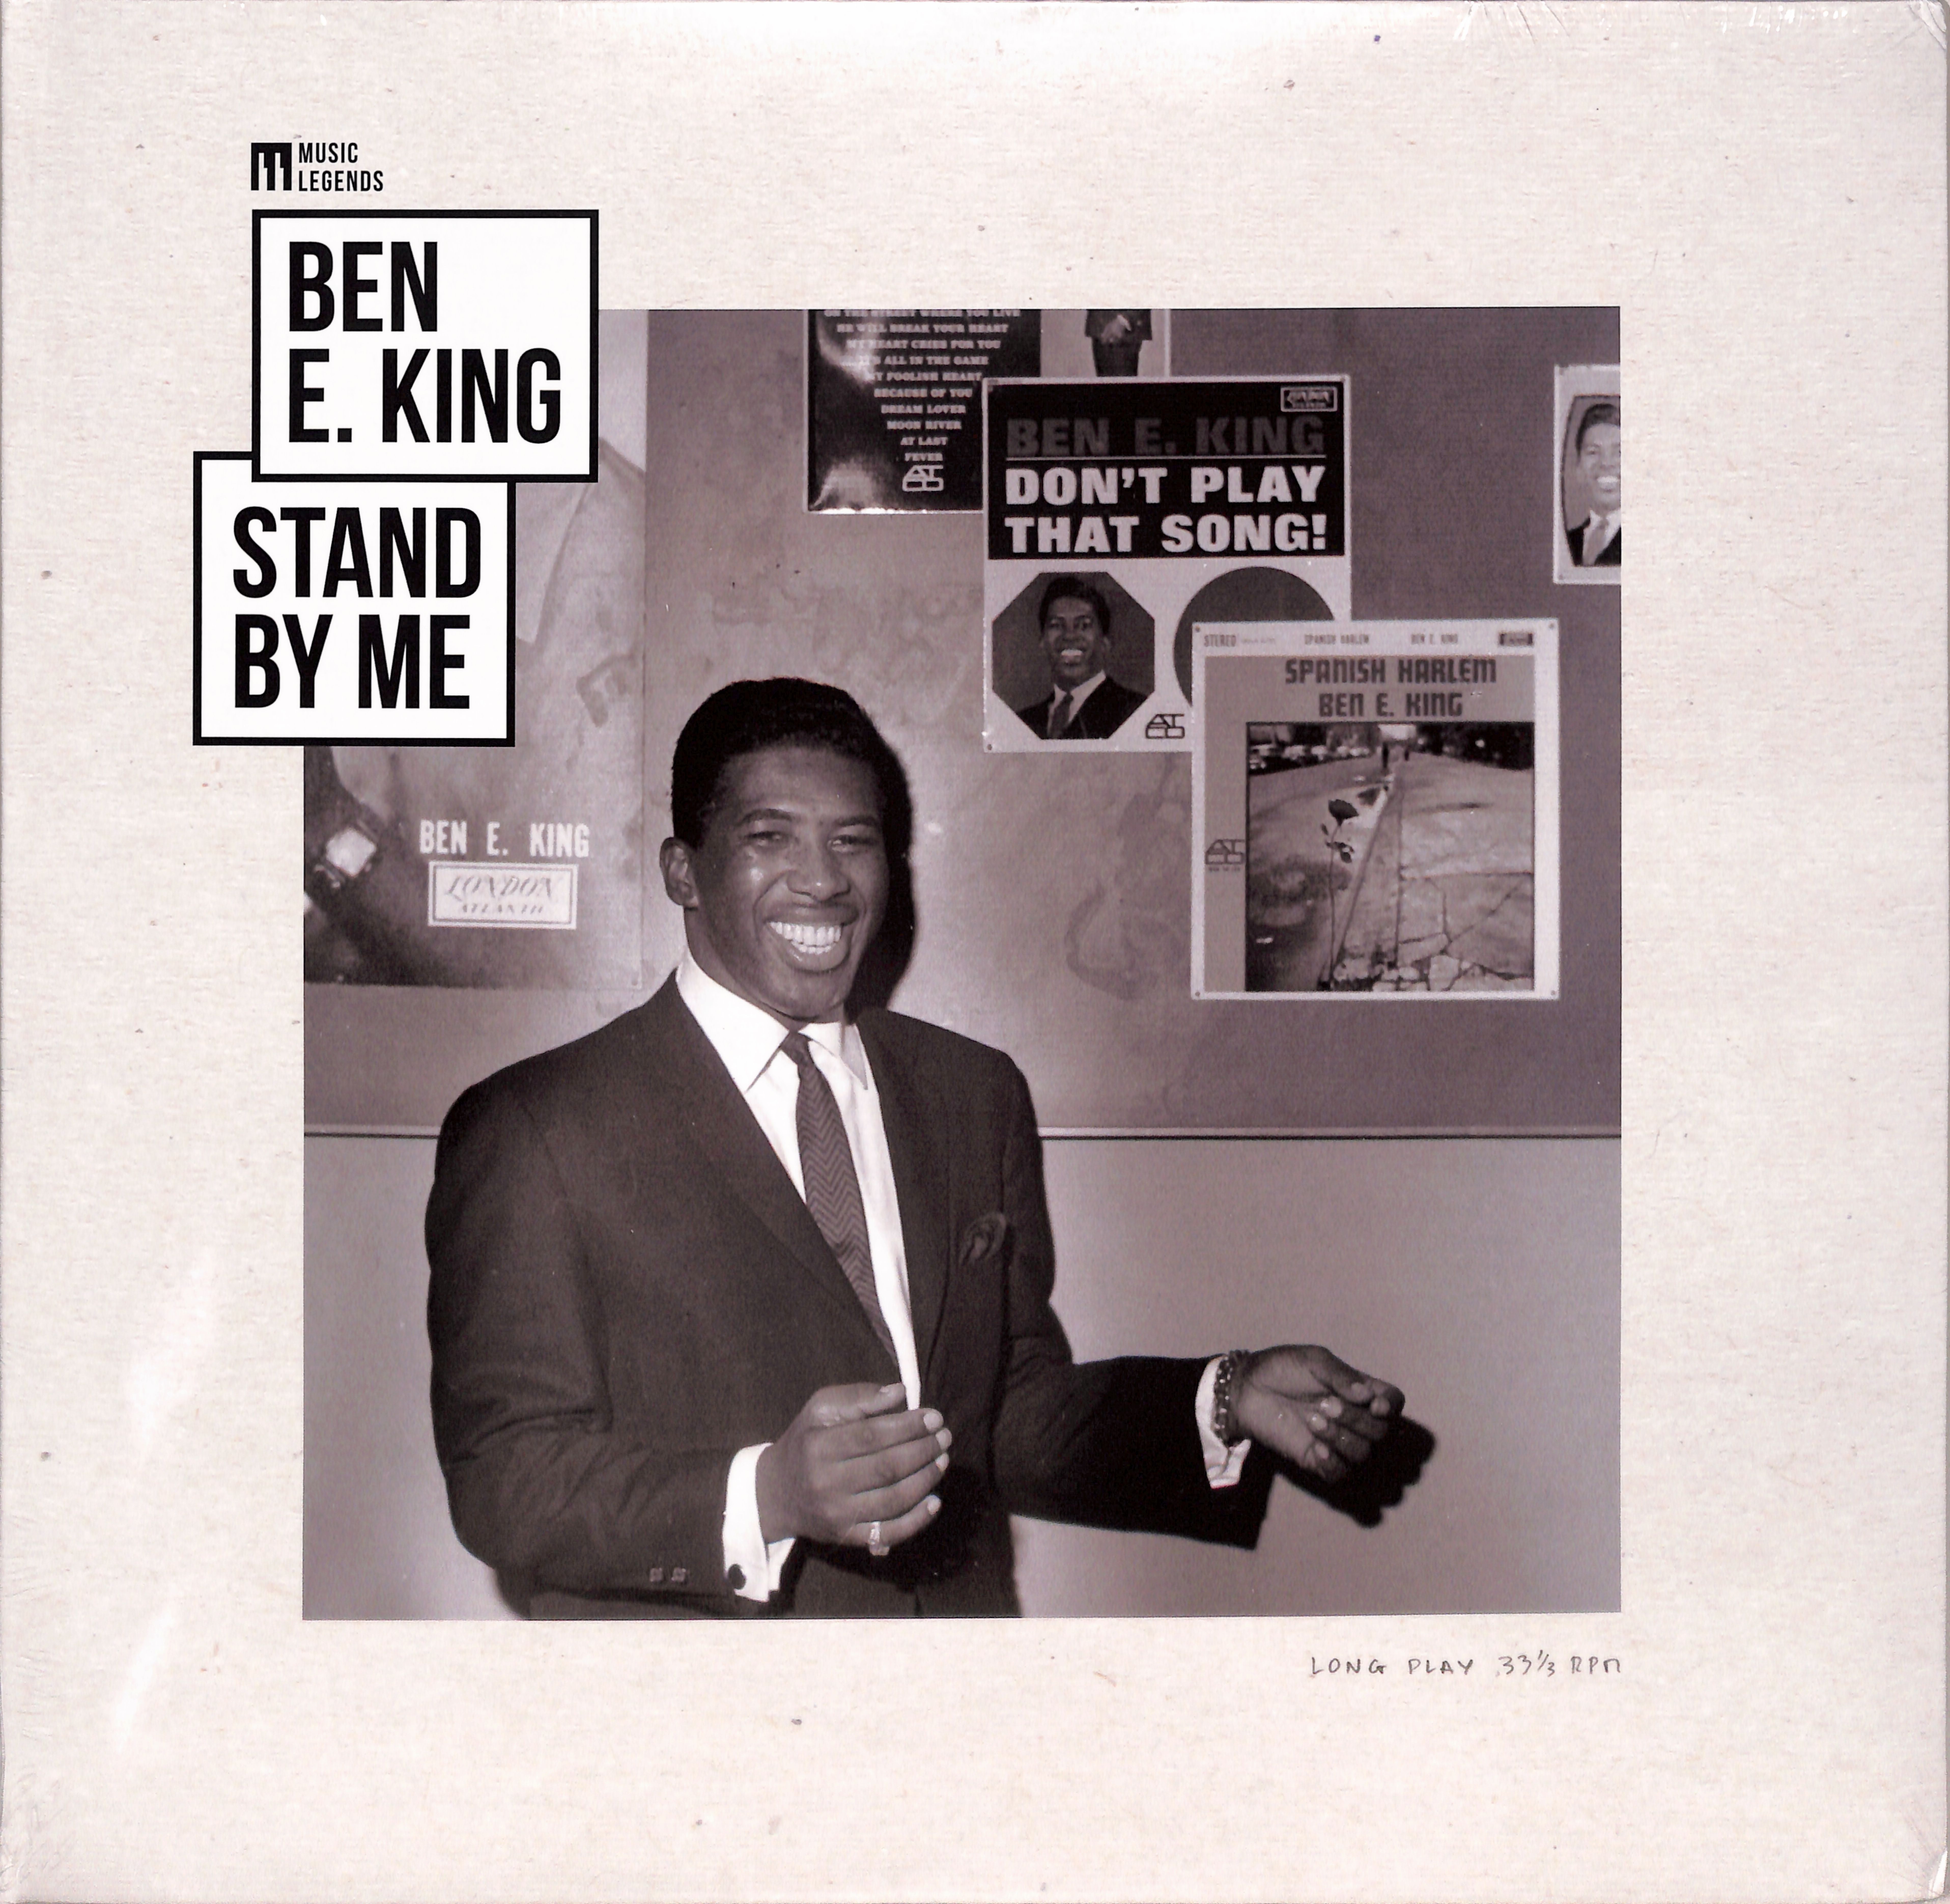 Ben E. King - stand by me (lp)